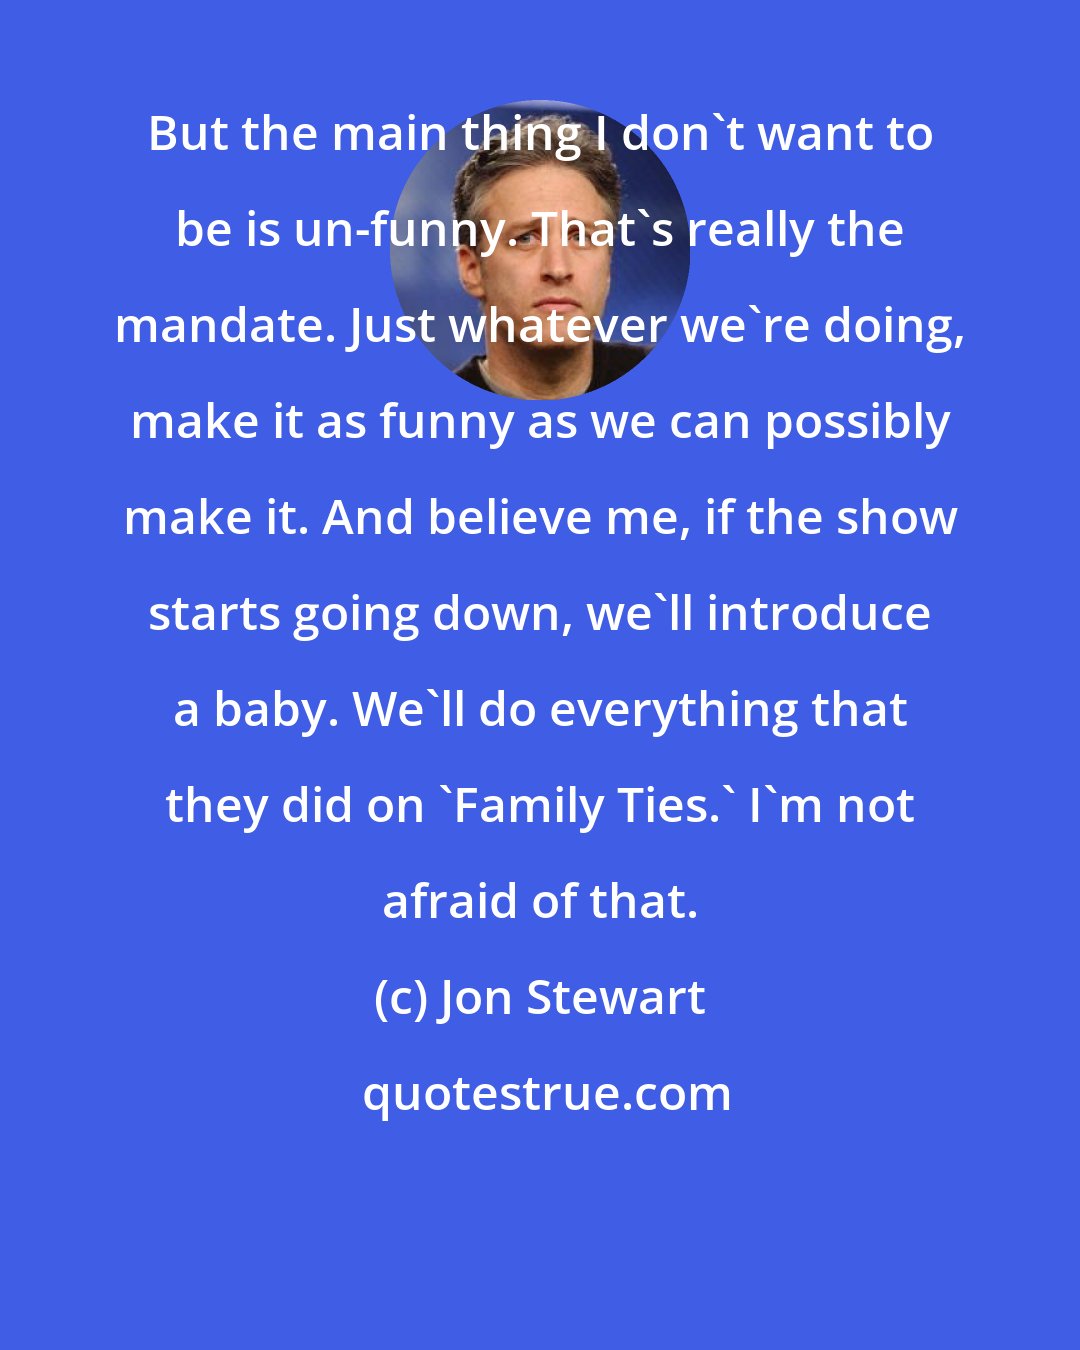 Jon Stewart: But the main thing I don't want to be is un-funny. That's really the mandate. Just whatever we're doing, make it as funny as we can possibly make it. And believe me, if the show starts going down, we'll introduce a baby. We'll do everything that they did on `Family Ties.' I'm not afraid of that.